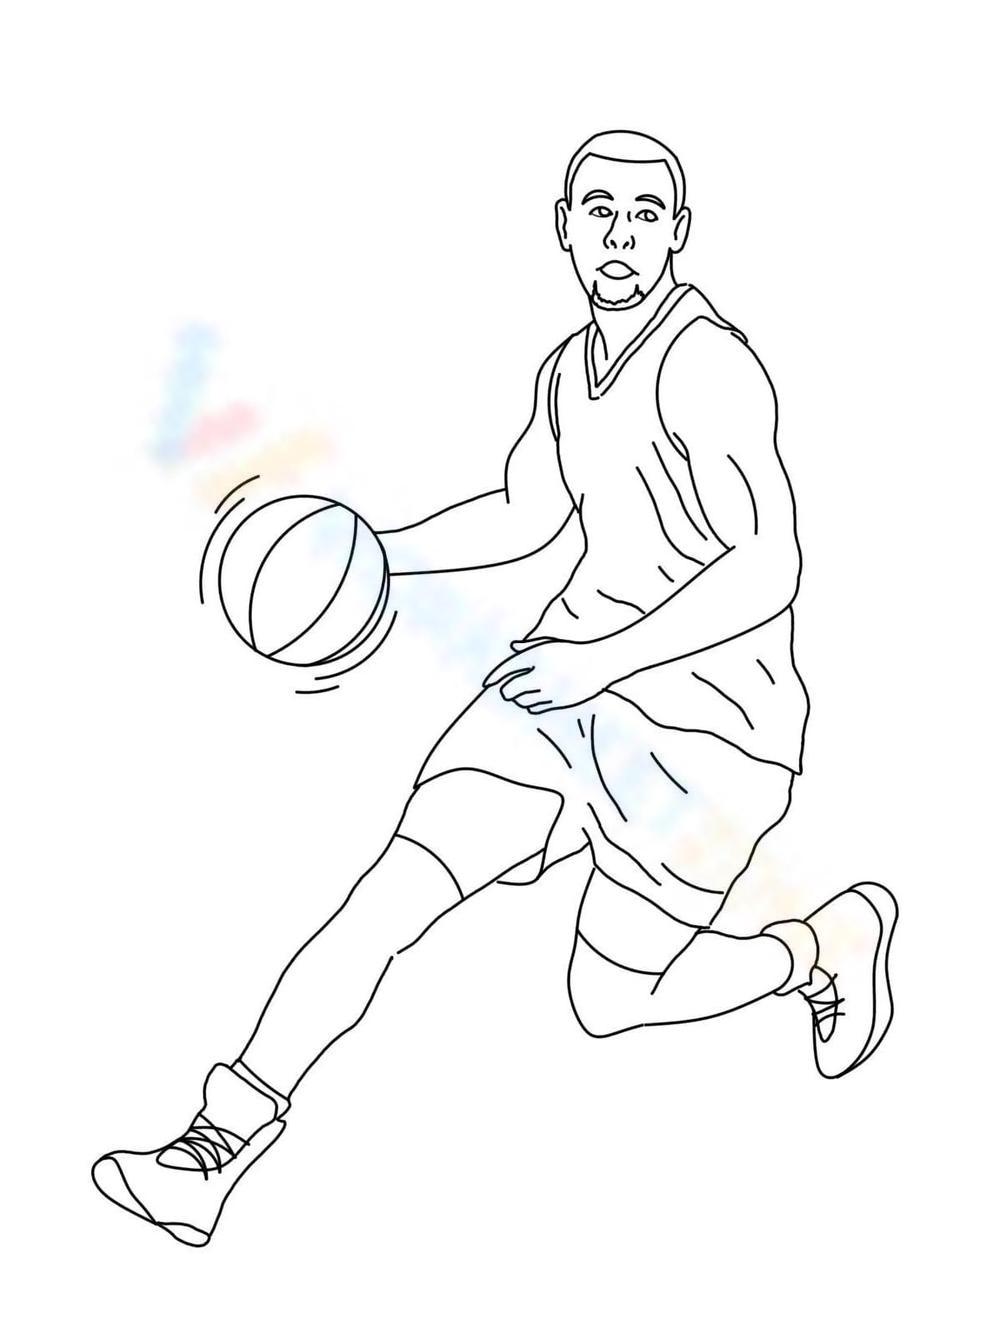 Iconic stephen curry worksheet